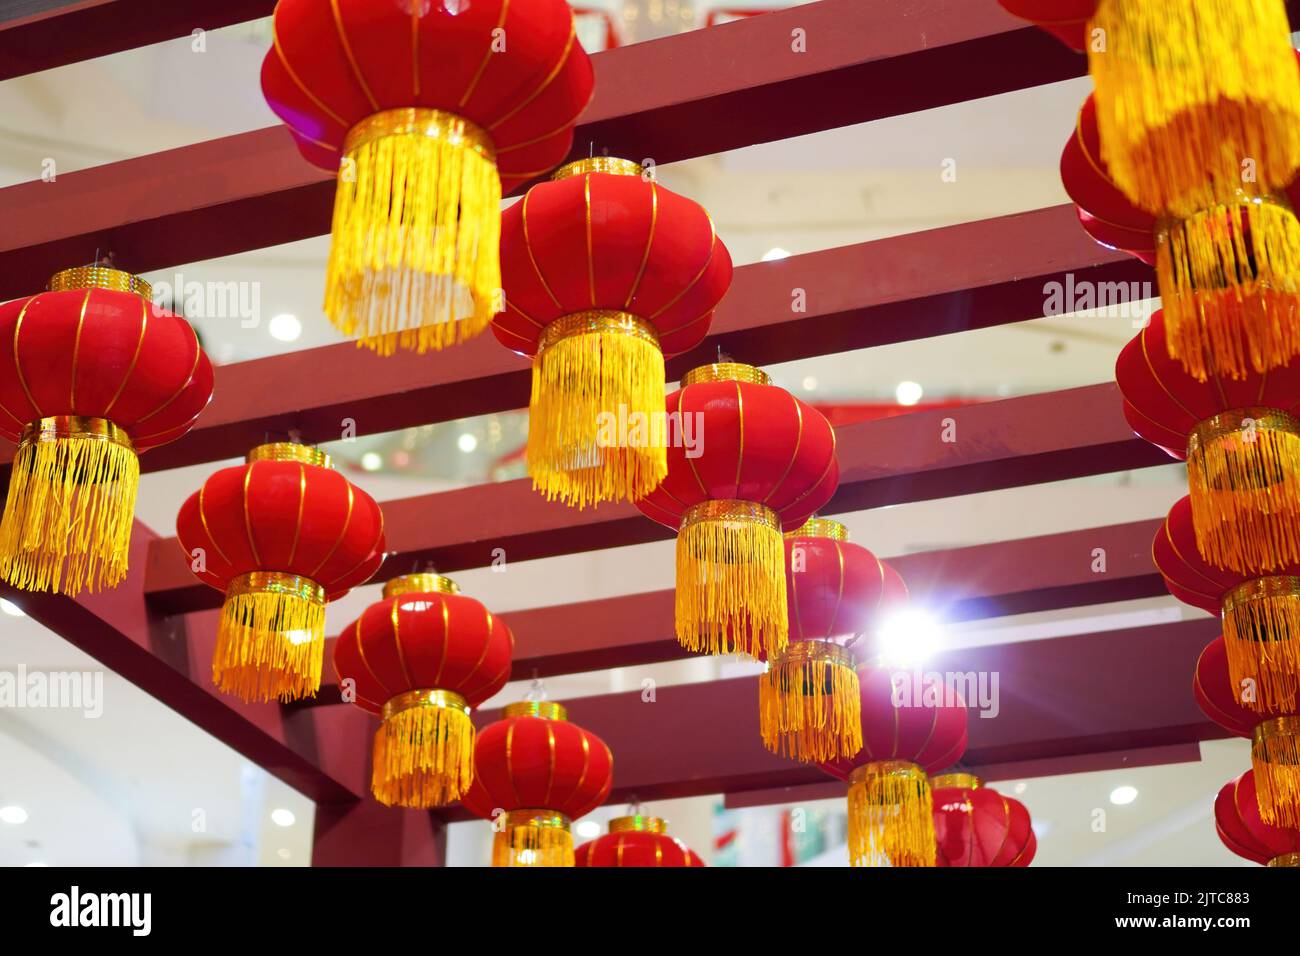 A low angle shot of a series of Chinese red lanterns with yellow strips, hanging from red pieces of wood for New Year decoration Stock Photo